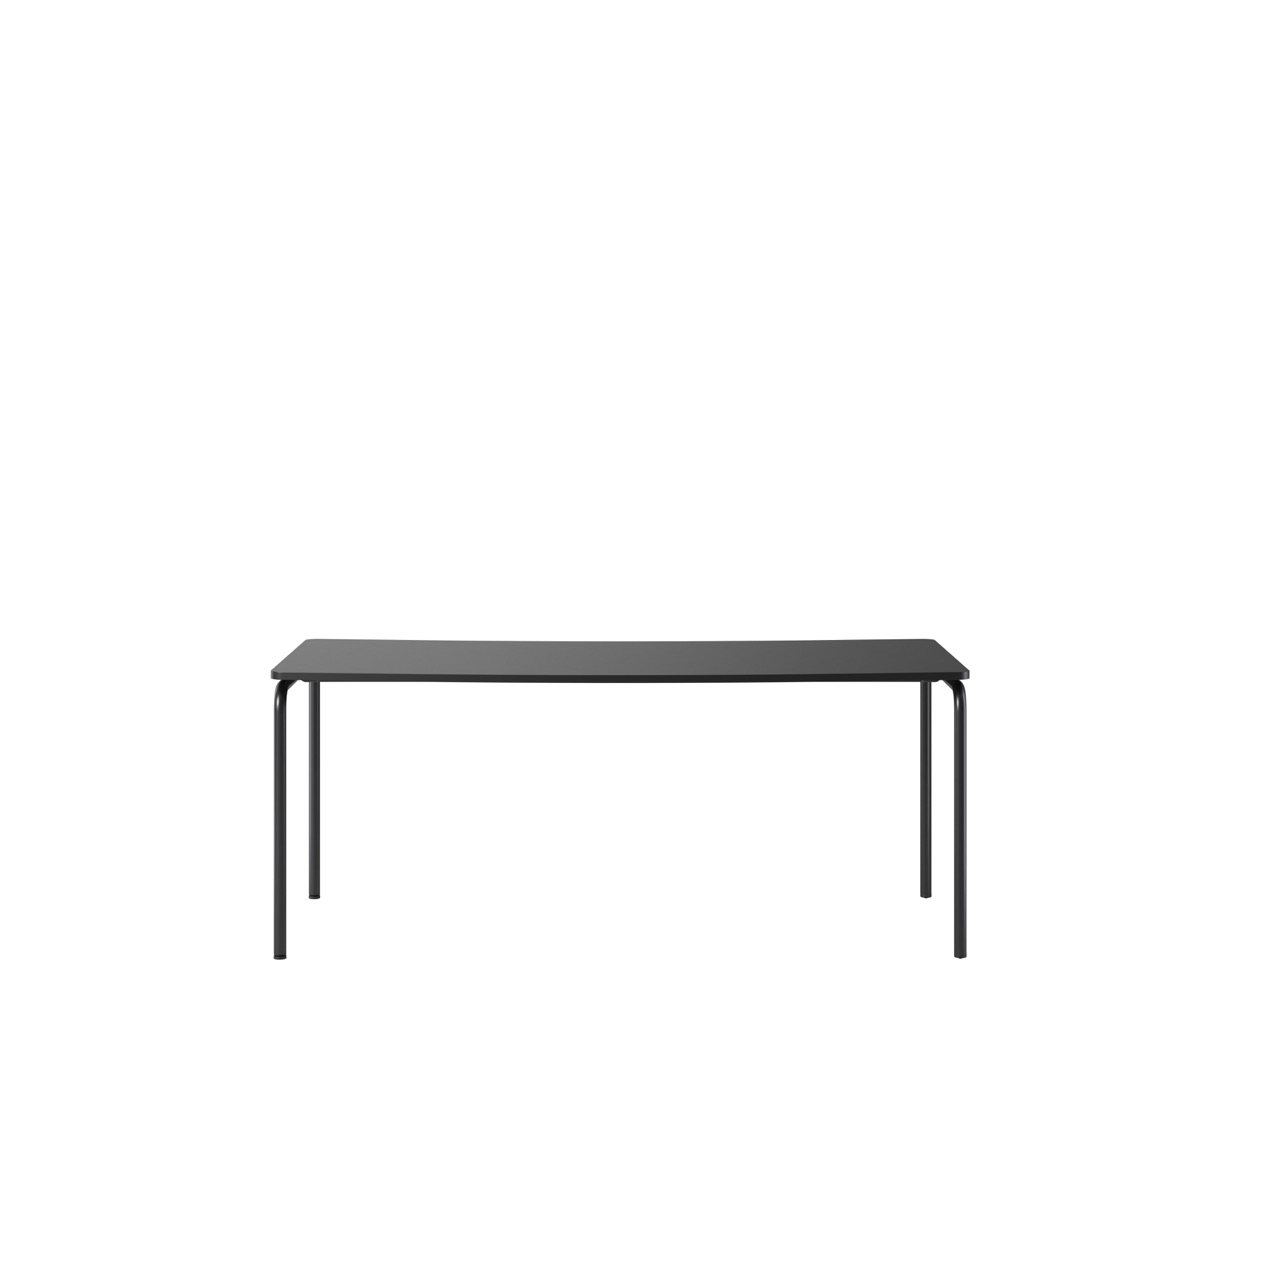 OCEE&FOUR - Tables - FourReal 74 - 180 x 80 - straight - Packshot Image 5 Large